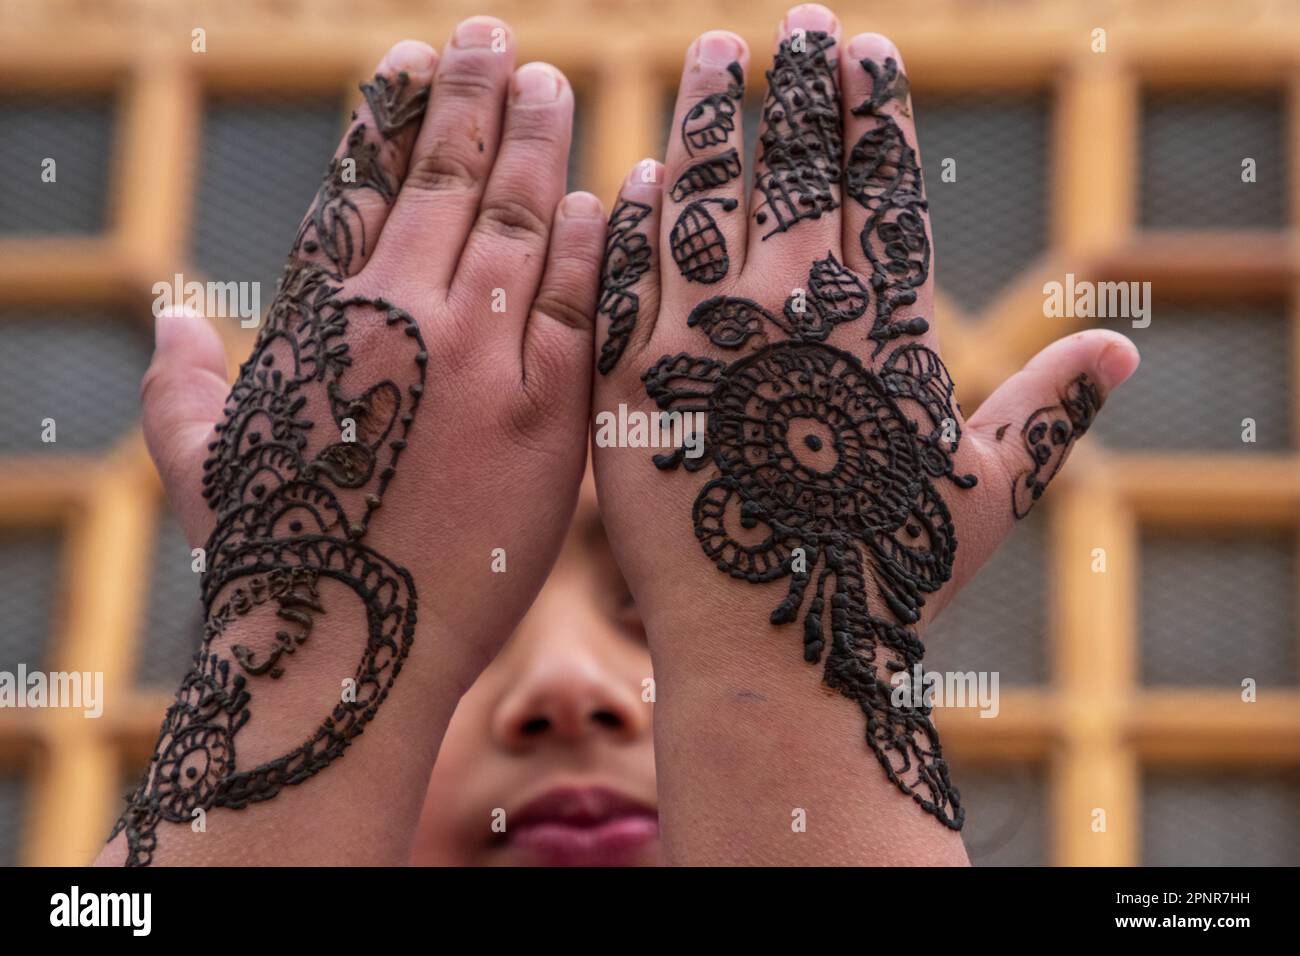 Kashmiri girl shows off her hands decorated with henna ahead of the Muslim  festival Eid-Al-Fitr. Eid Al-Fitr is a festival that marks the end of the  Muslim holy month of Ramadan. (Photo